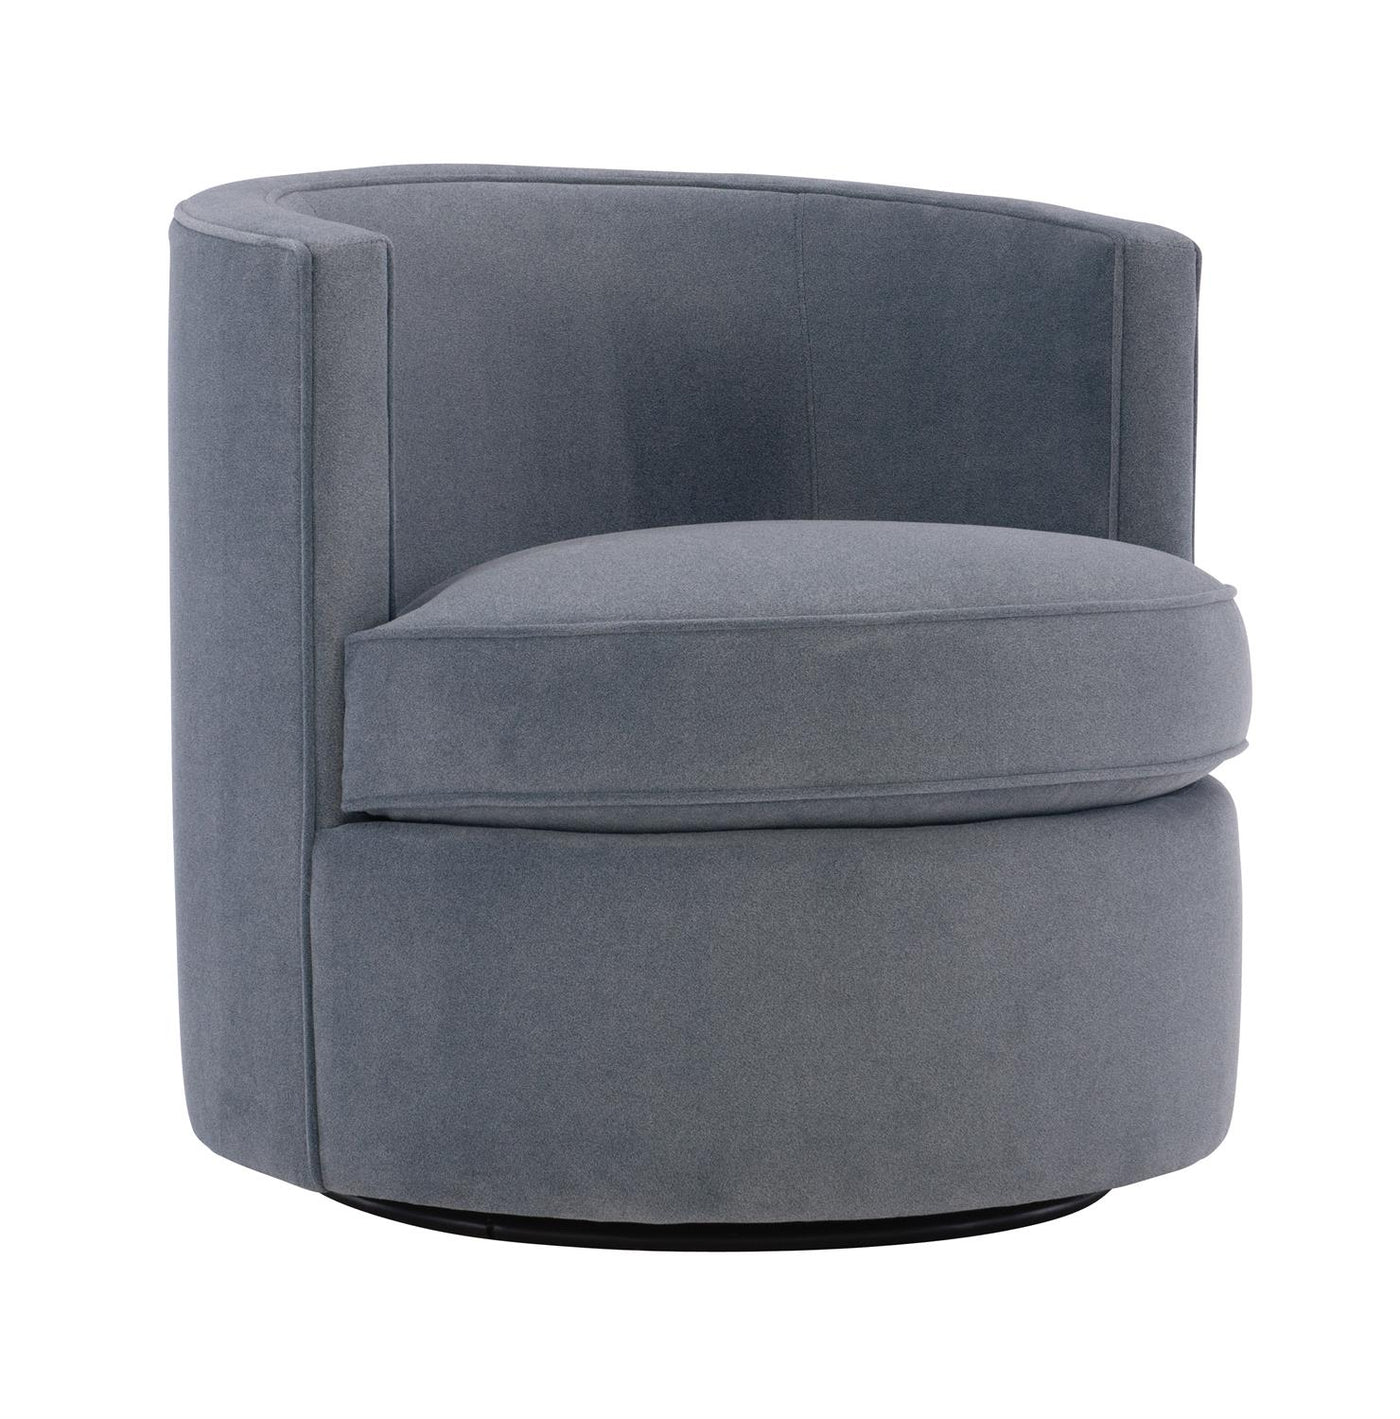 CHAIR SWIVEL UPHOLSTERED ROUNDED